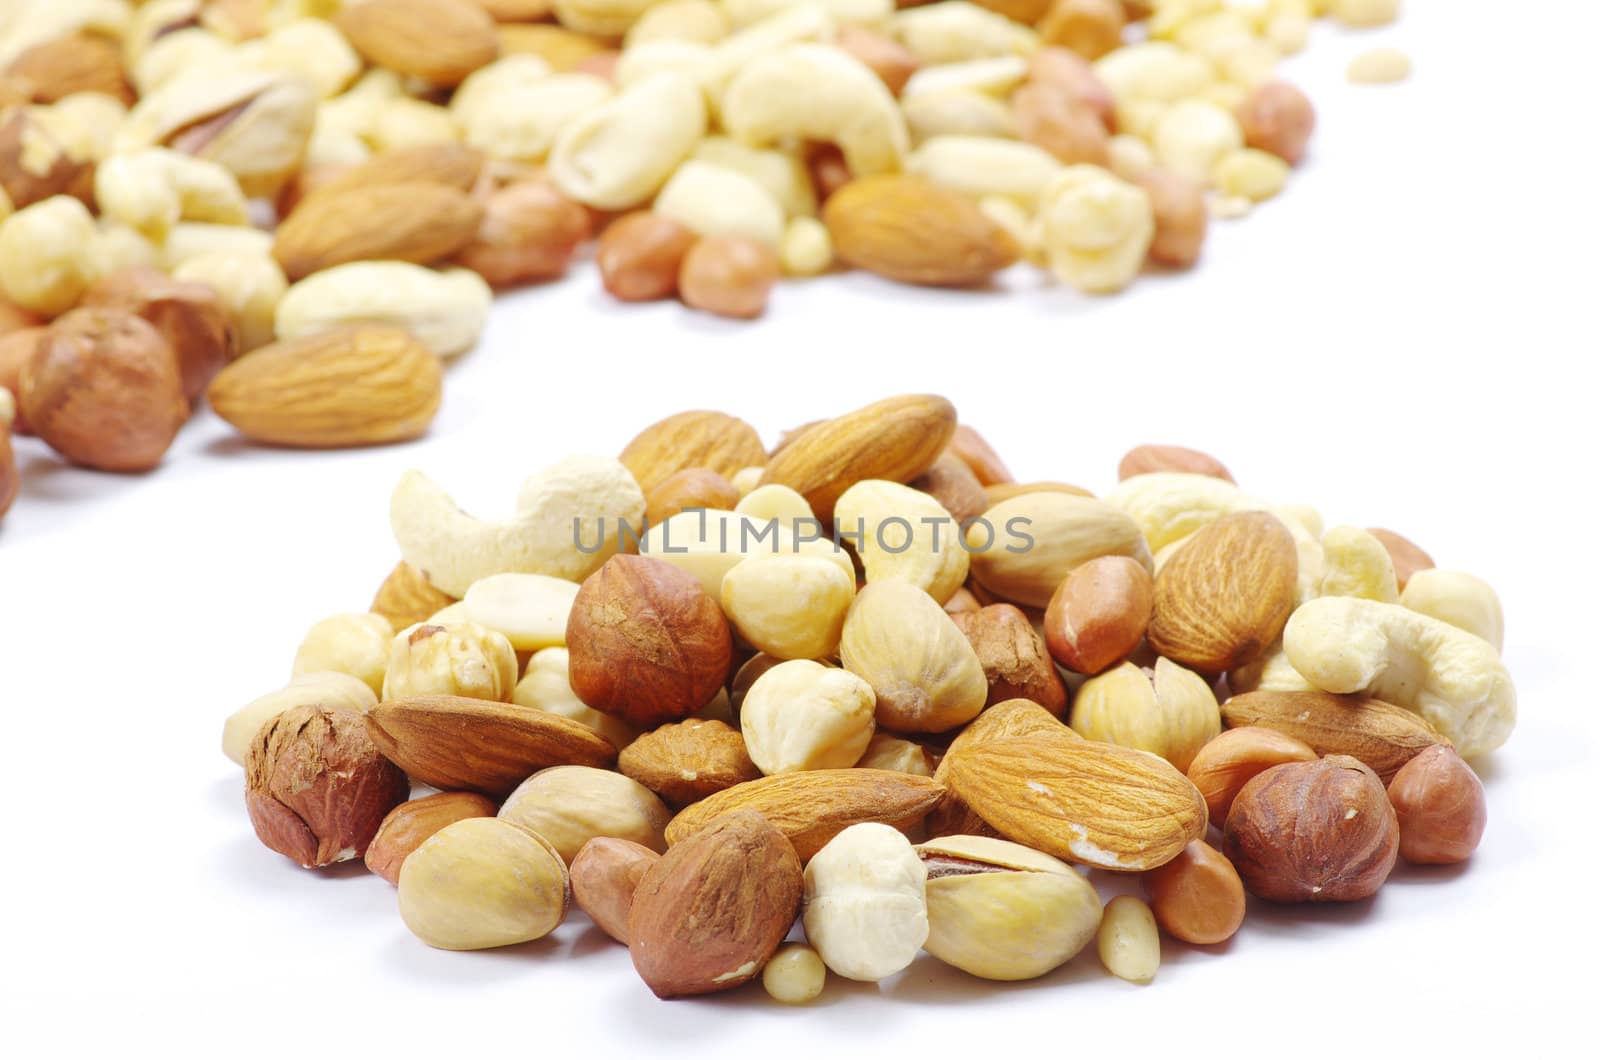 Assorted mixed nuts on white background